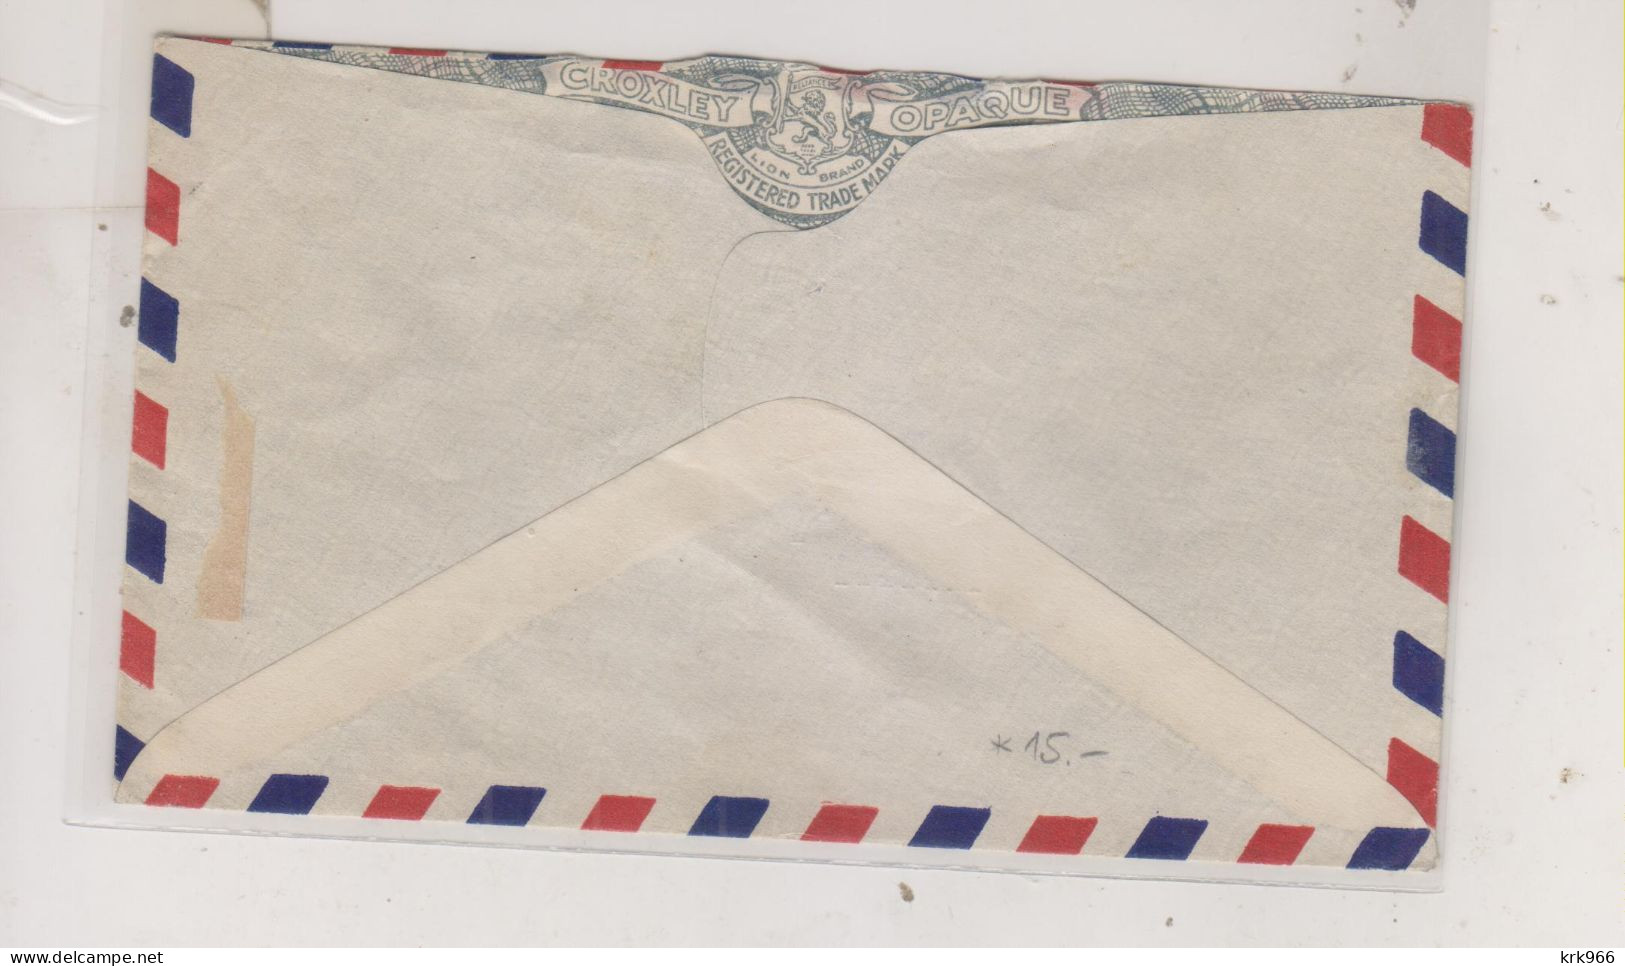 SOUTH AFRICA 1948 CAPE TOWN Nice  Airmail Cover To Switzerland - Luchtpost